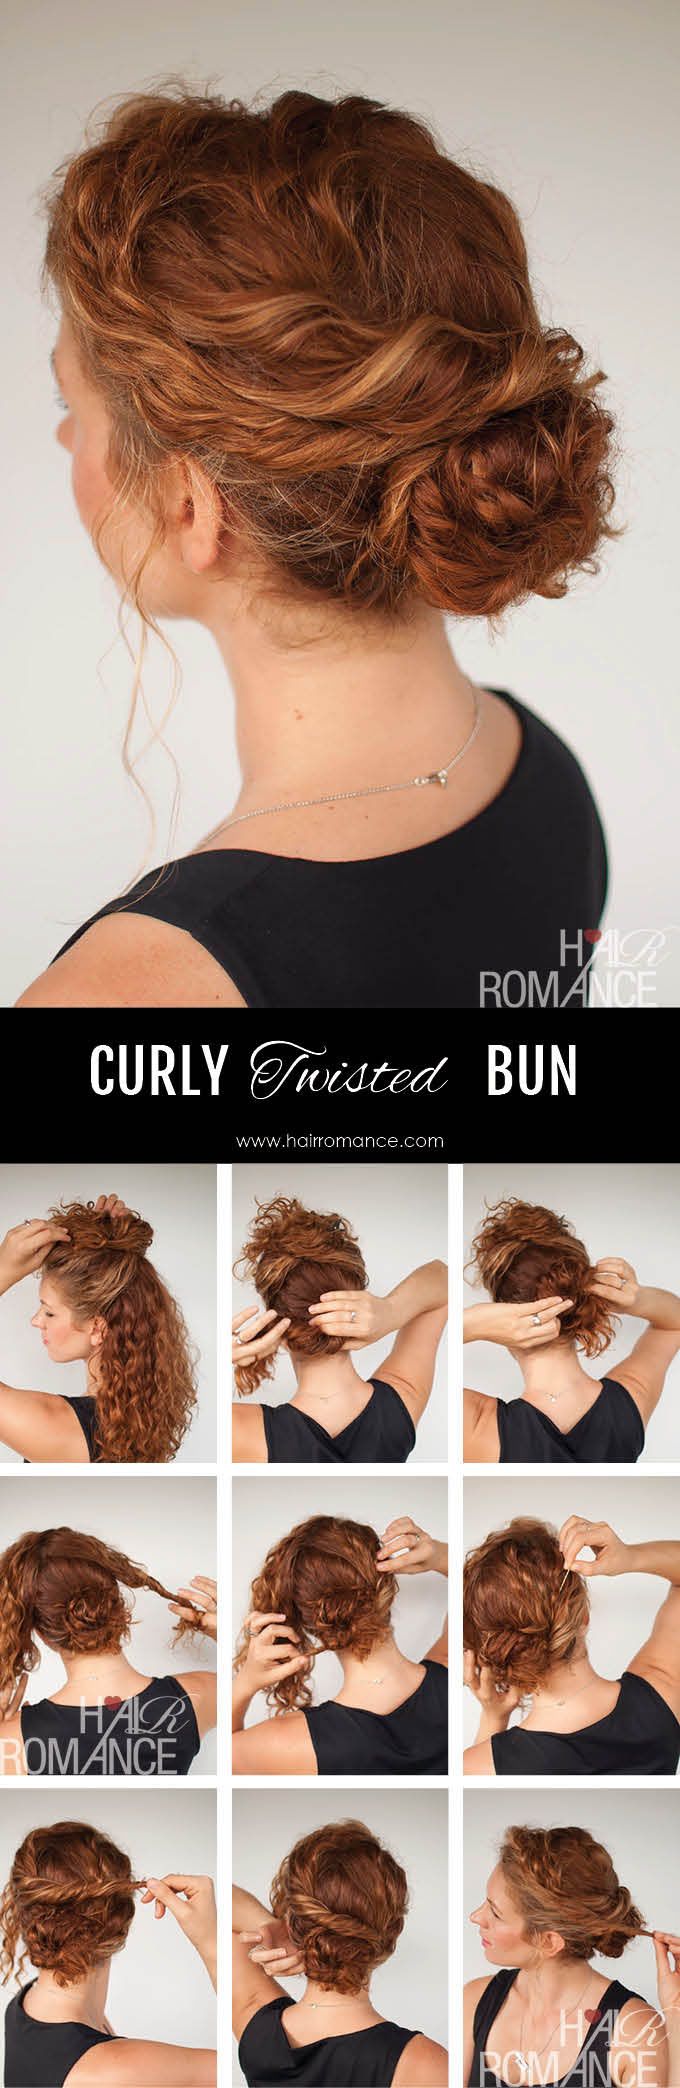 15 Easy Hairstyle Tutorials for All Occasions Styles Weekly